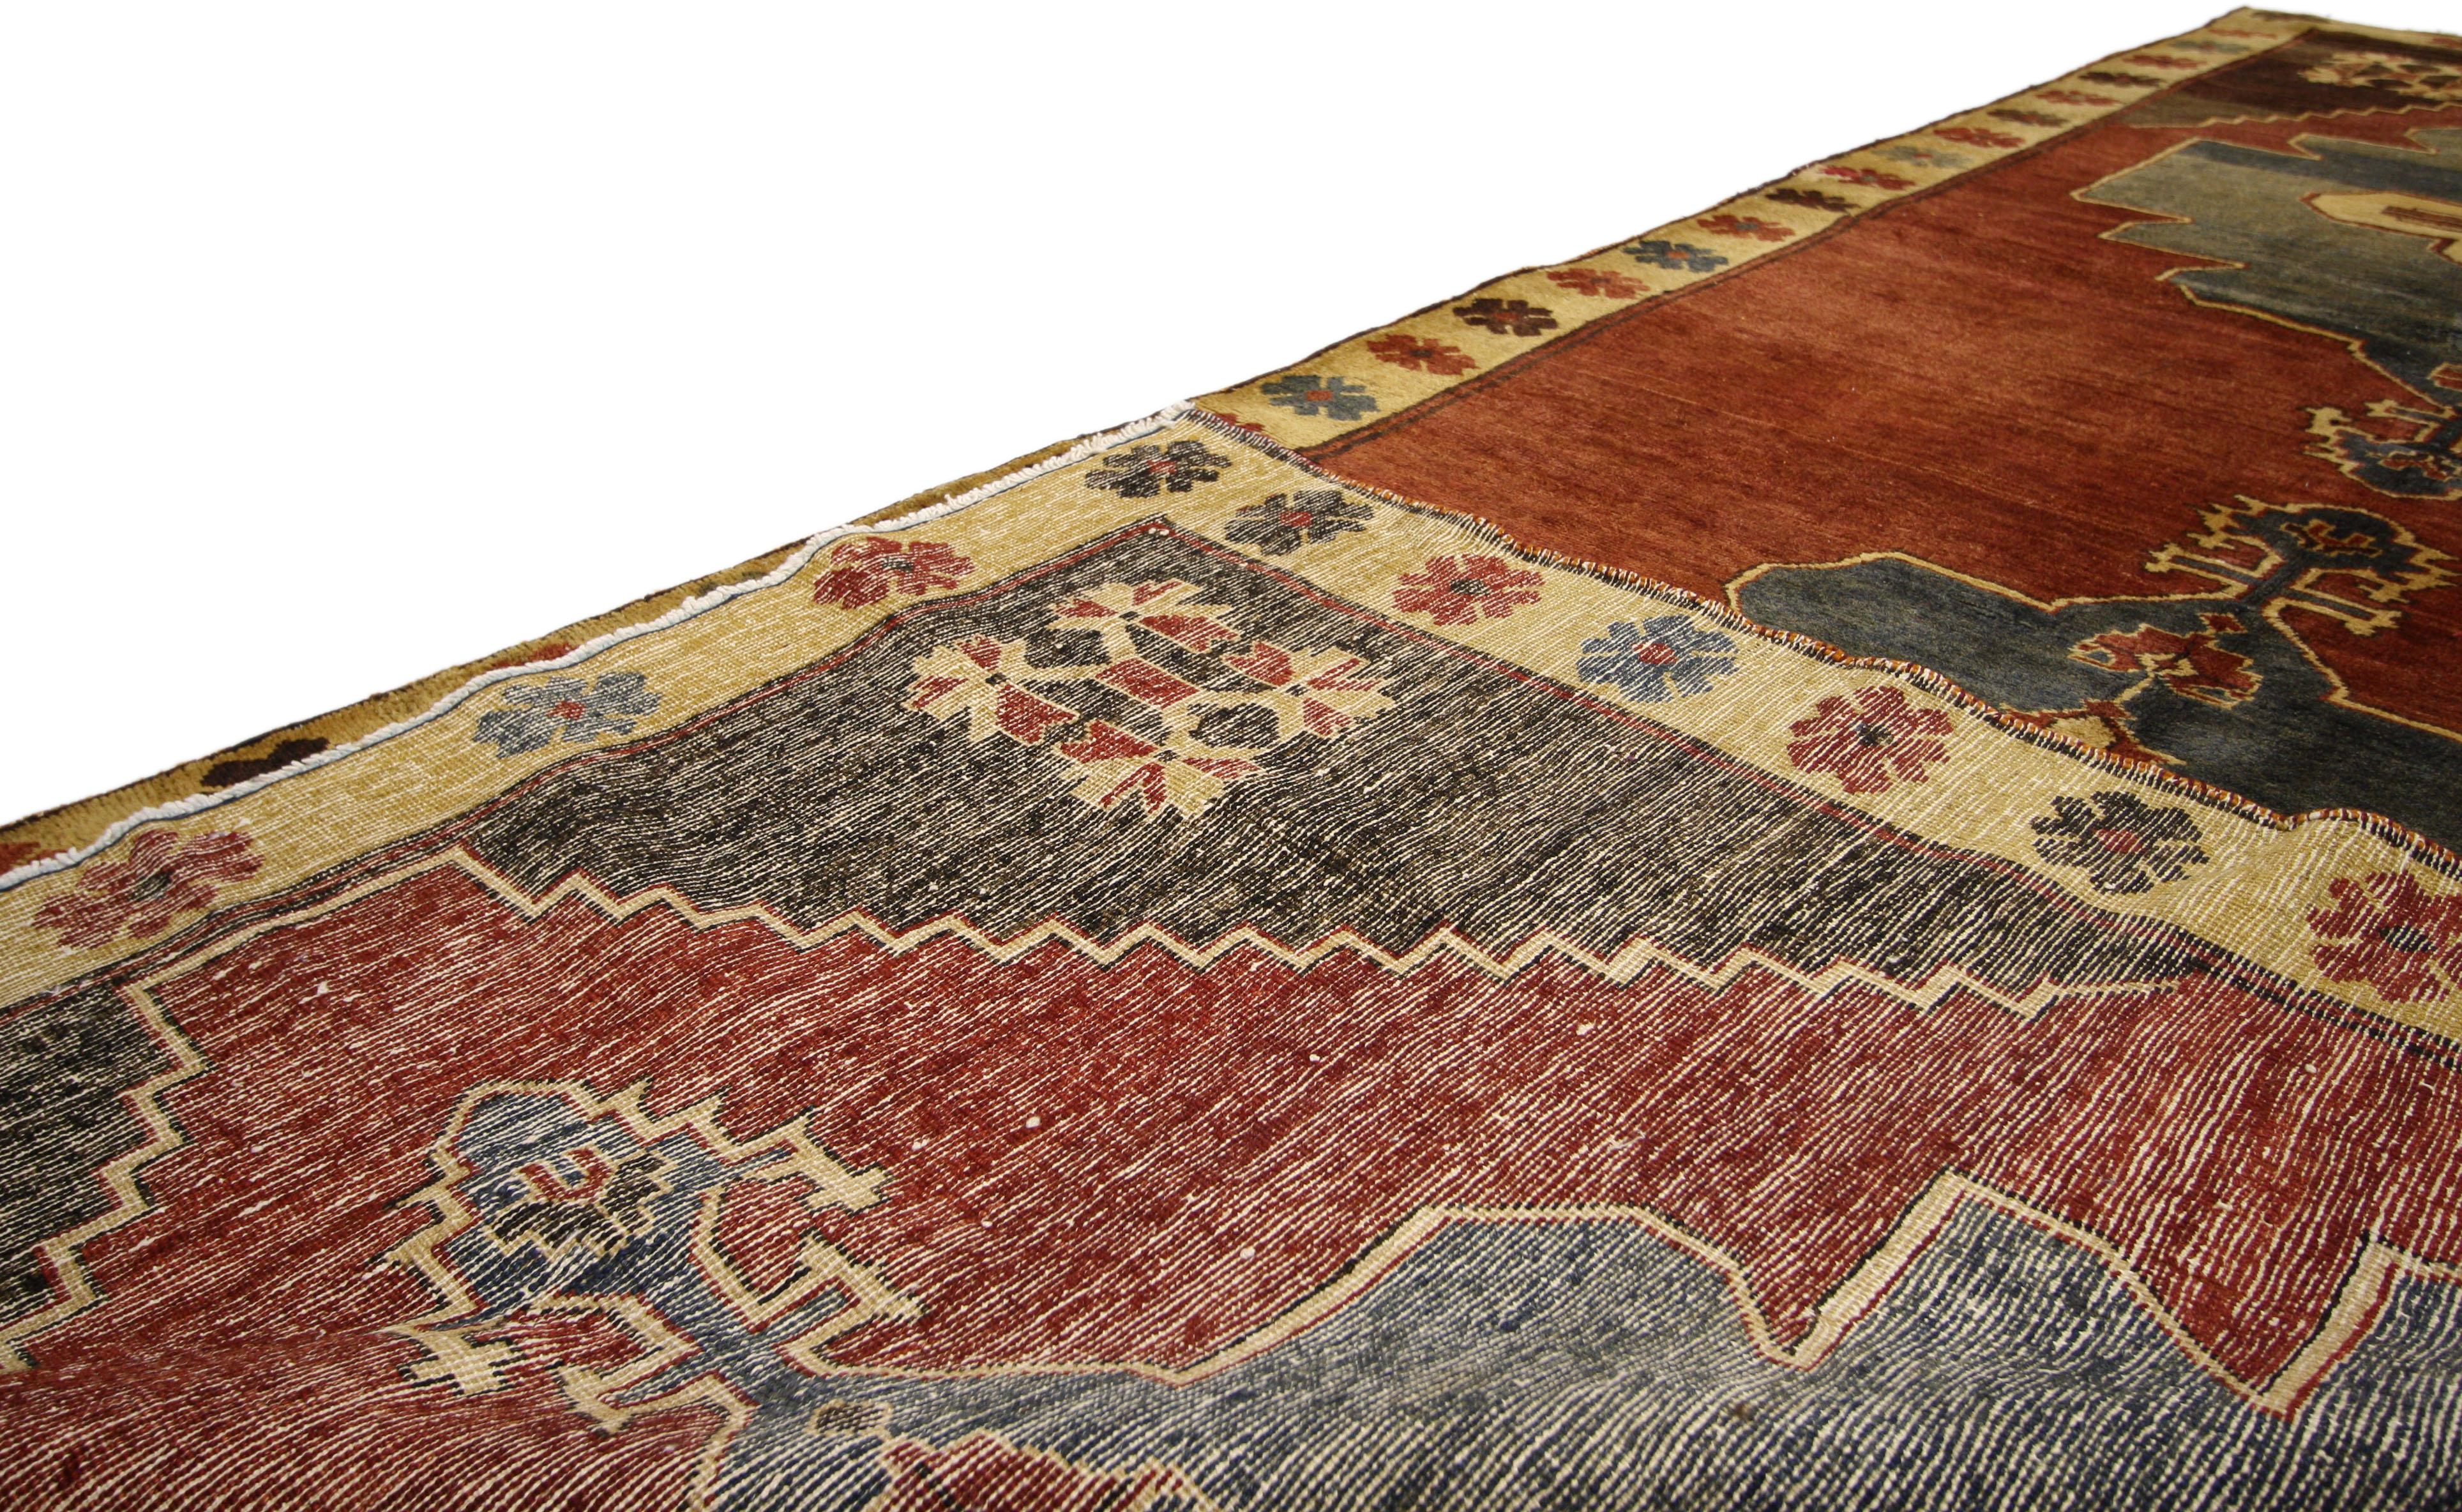 20th Century Vintage Turkish Oushak Gallery Rug with Art Deco and Mid-Century Modern Style